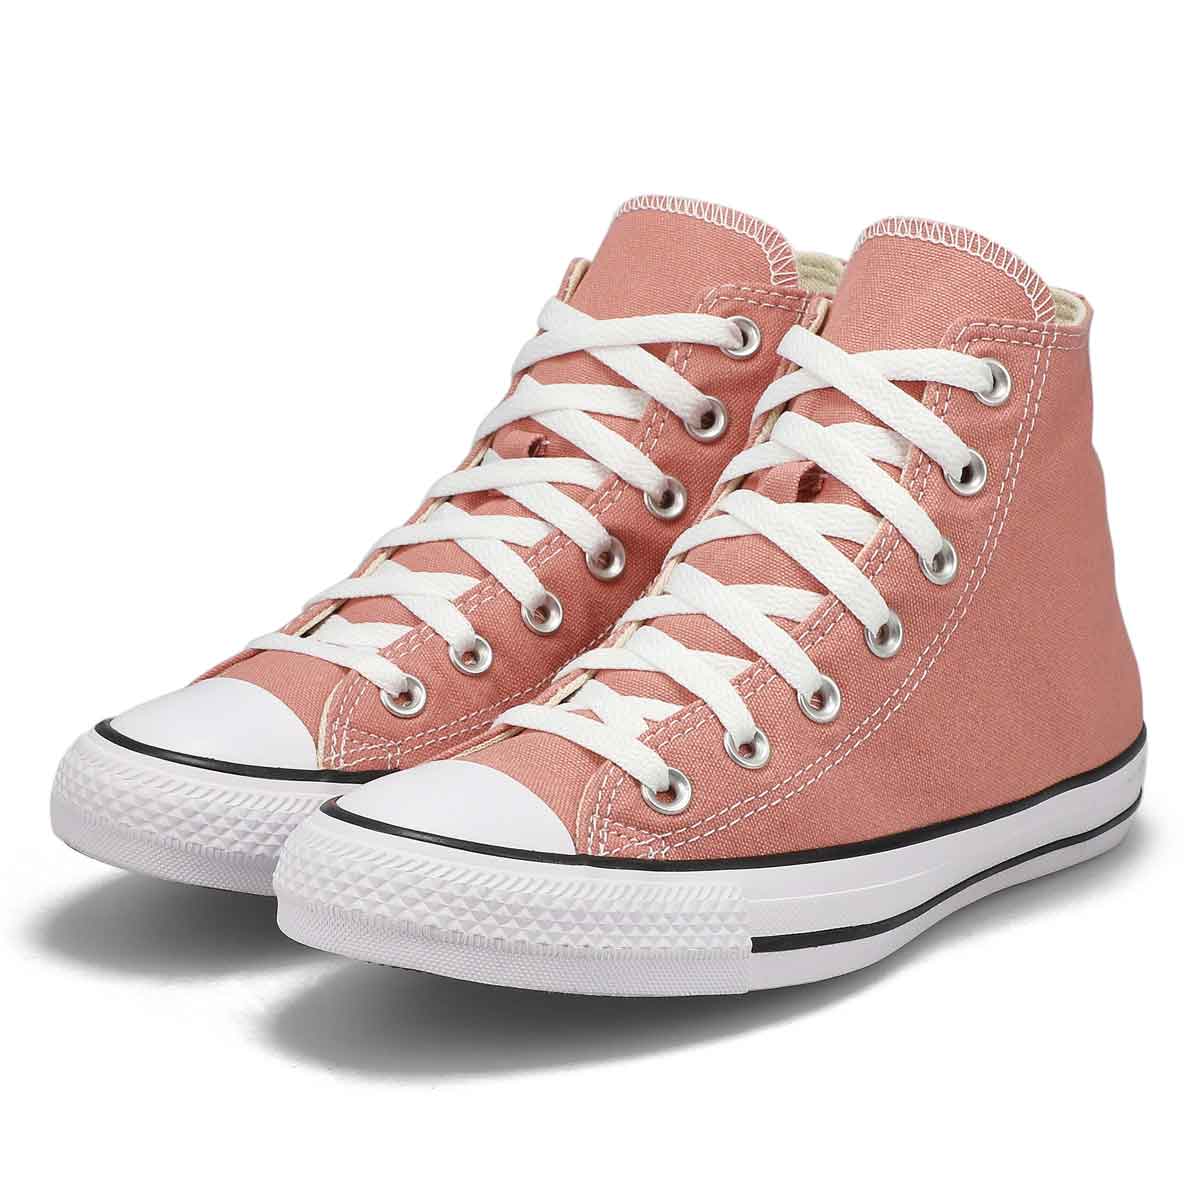 Converse Women's CT All Star Hi Sneaker- Cany 